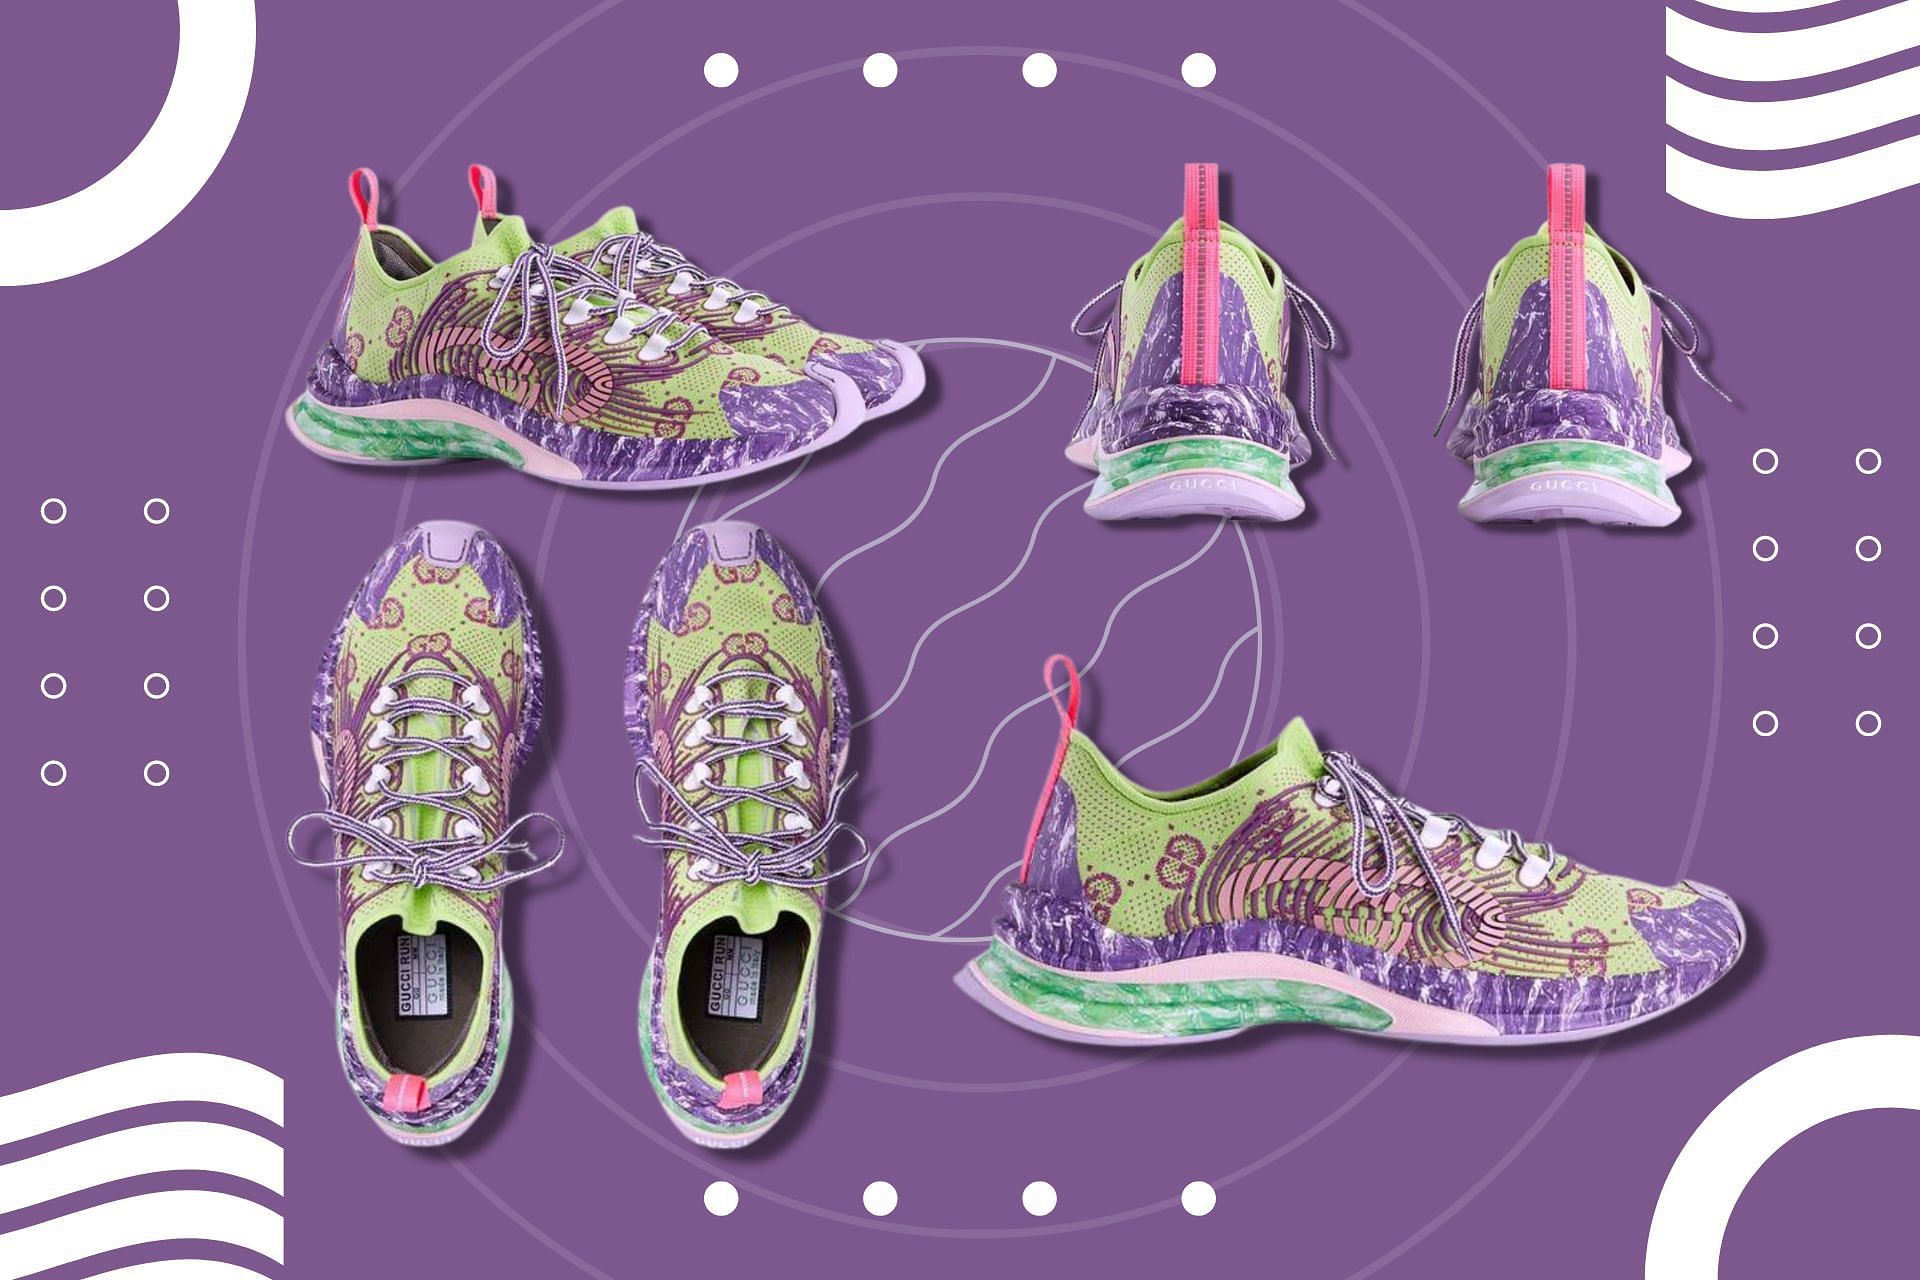 Take a closer look at the Green and Fuchsia colorway (Image via Sportskeeda)